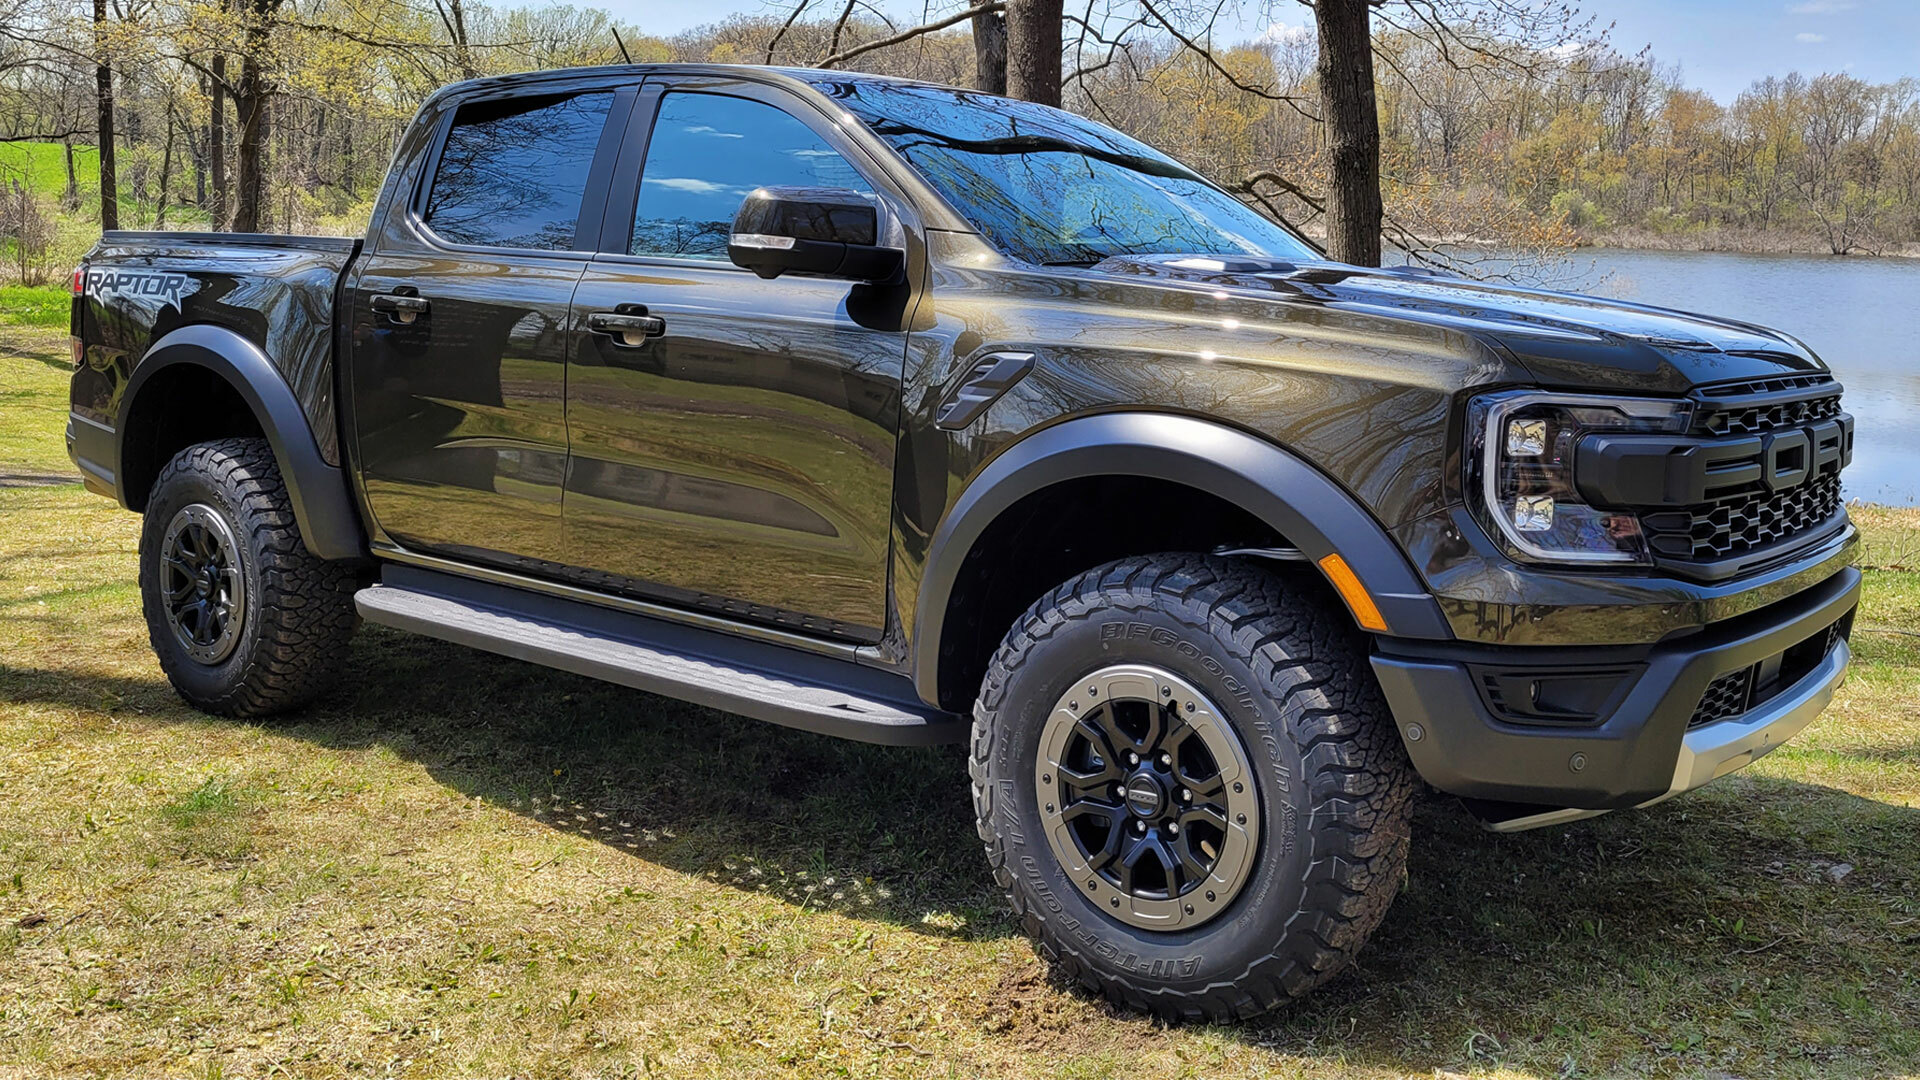 NEW Ford Ranger Raptor review the ULTIMATE 4x4?!, ford ranger